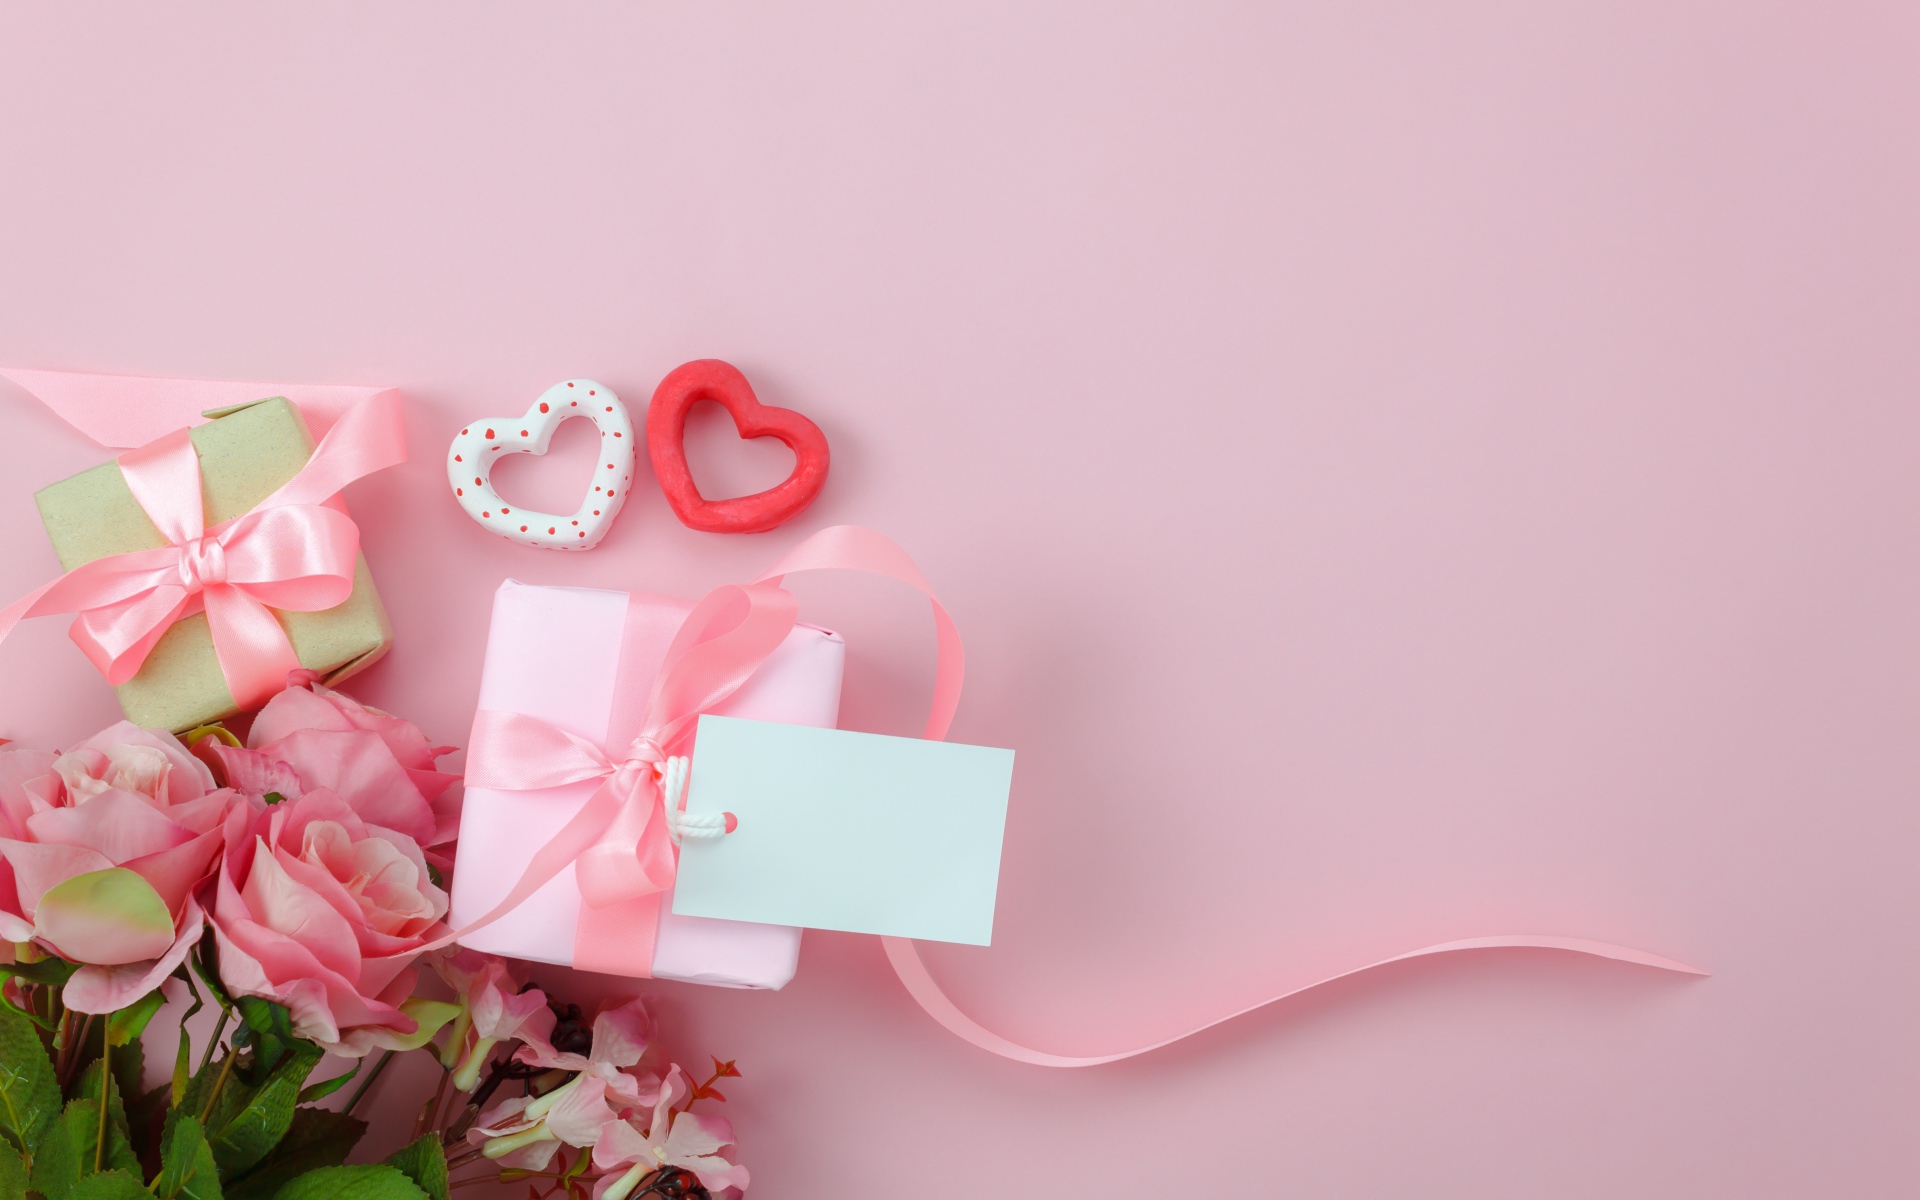 A bouquet of roses, gifts and two hearts on a pink background greeting card template for March 8